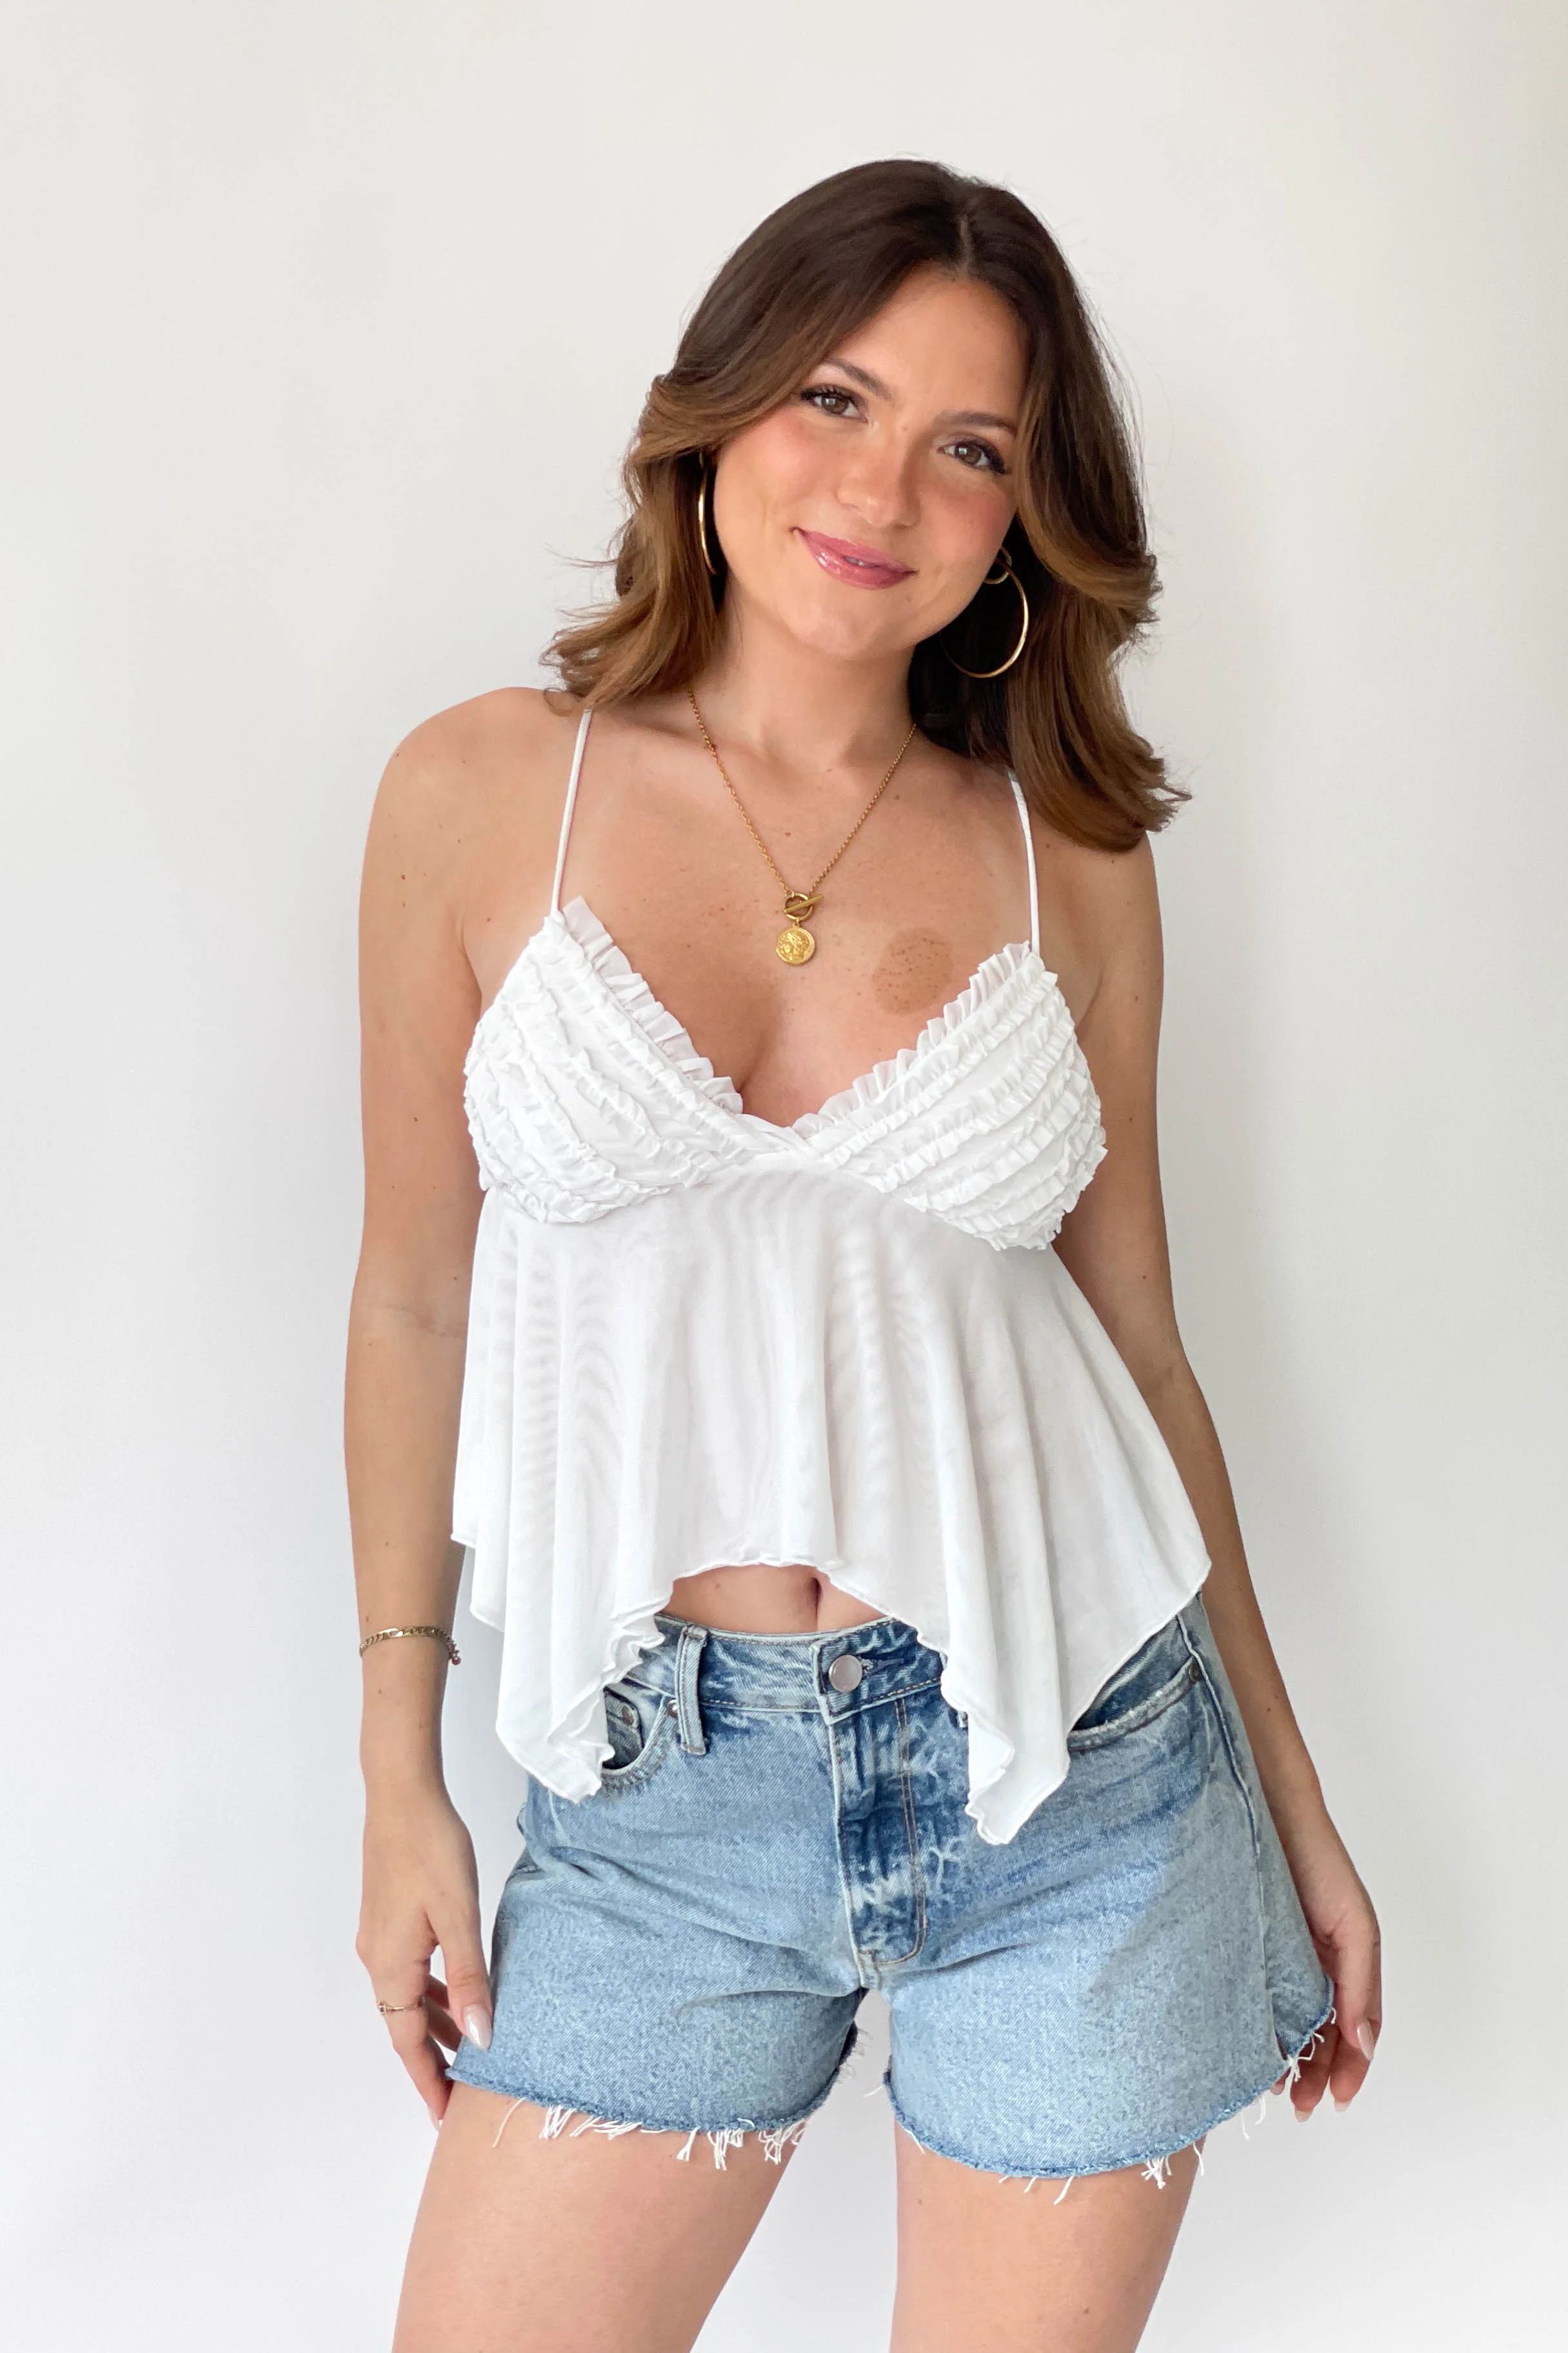 Adore You Top in White | Grey Bandit